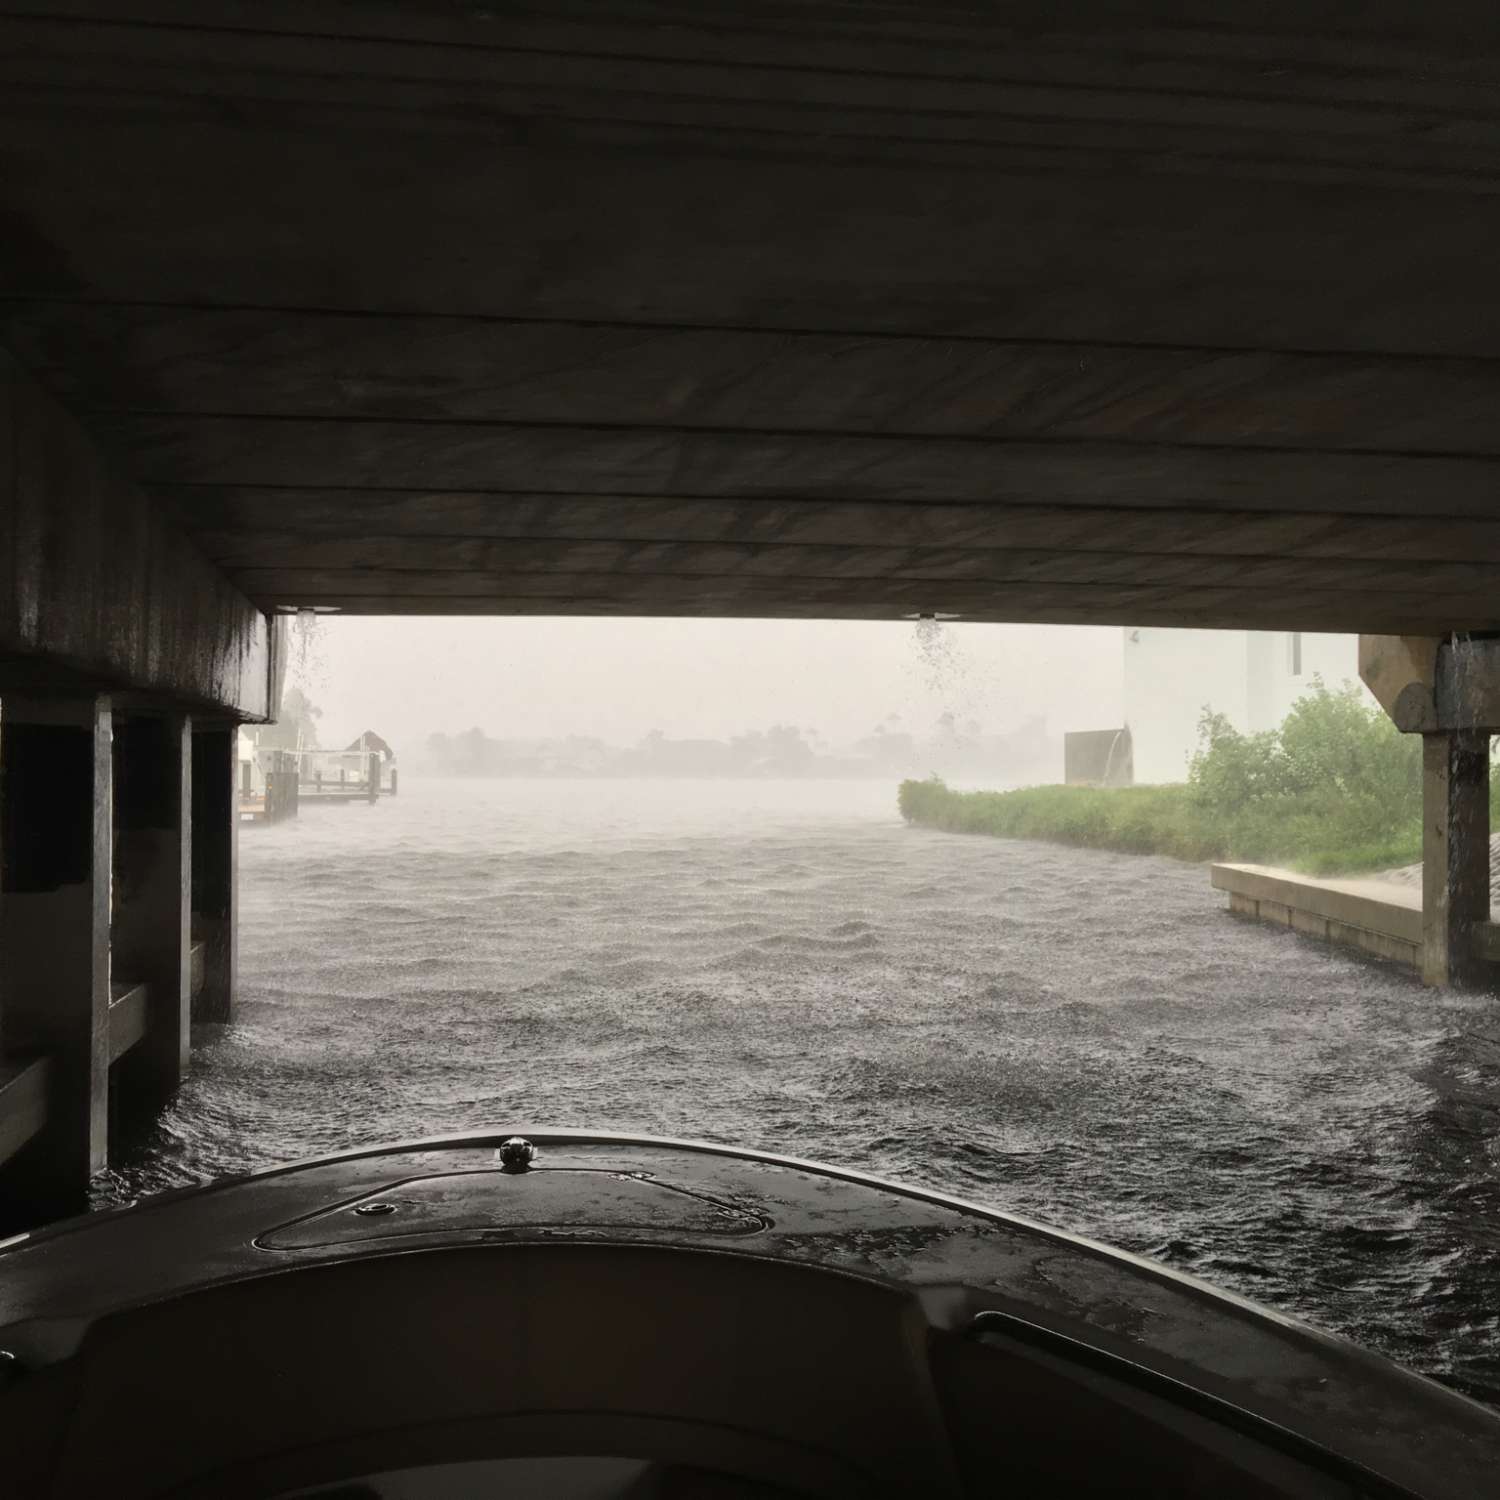 Cape Coral, Florida. Hiding under a overpass bridge during a downpour, not even 1 mile from hom...